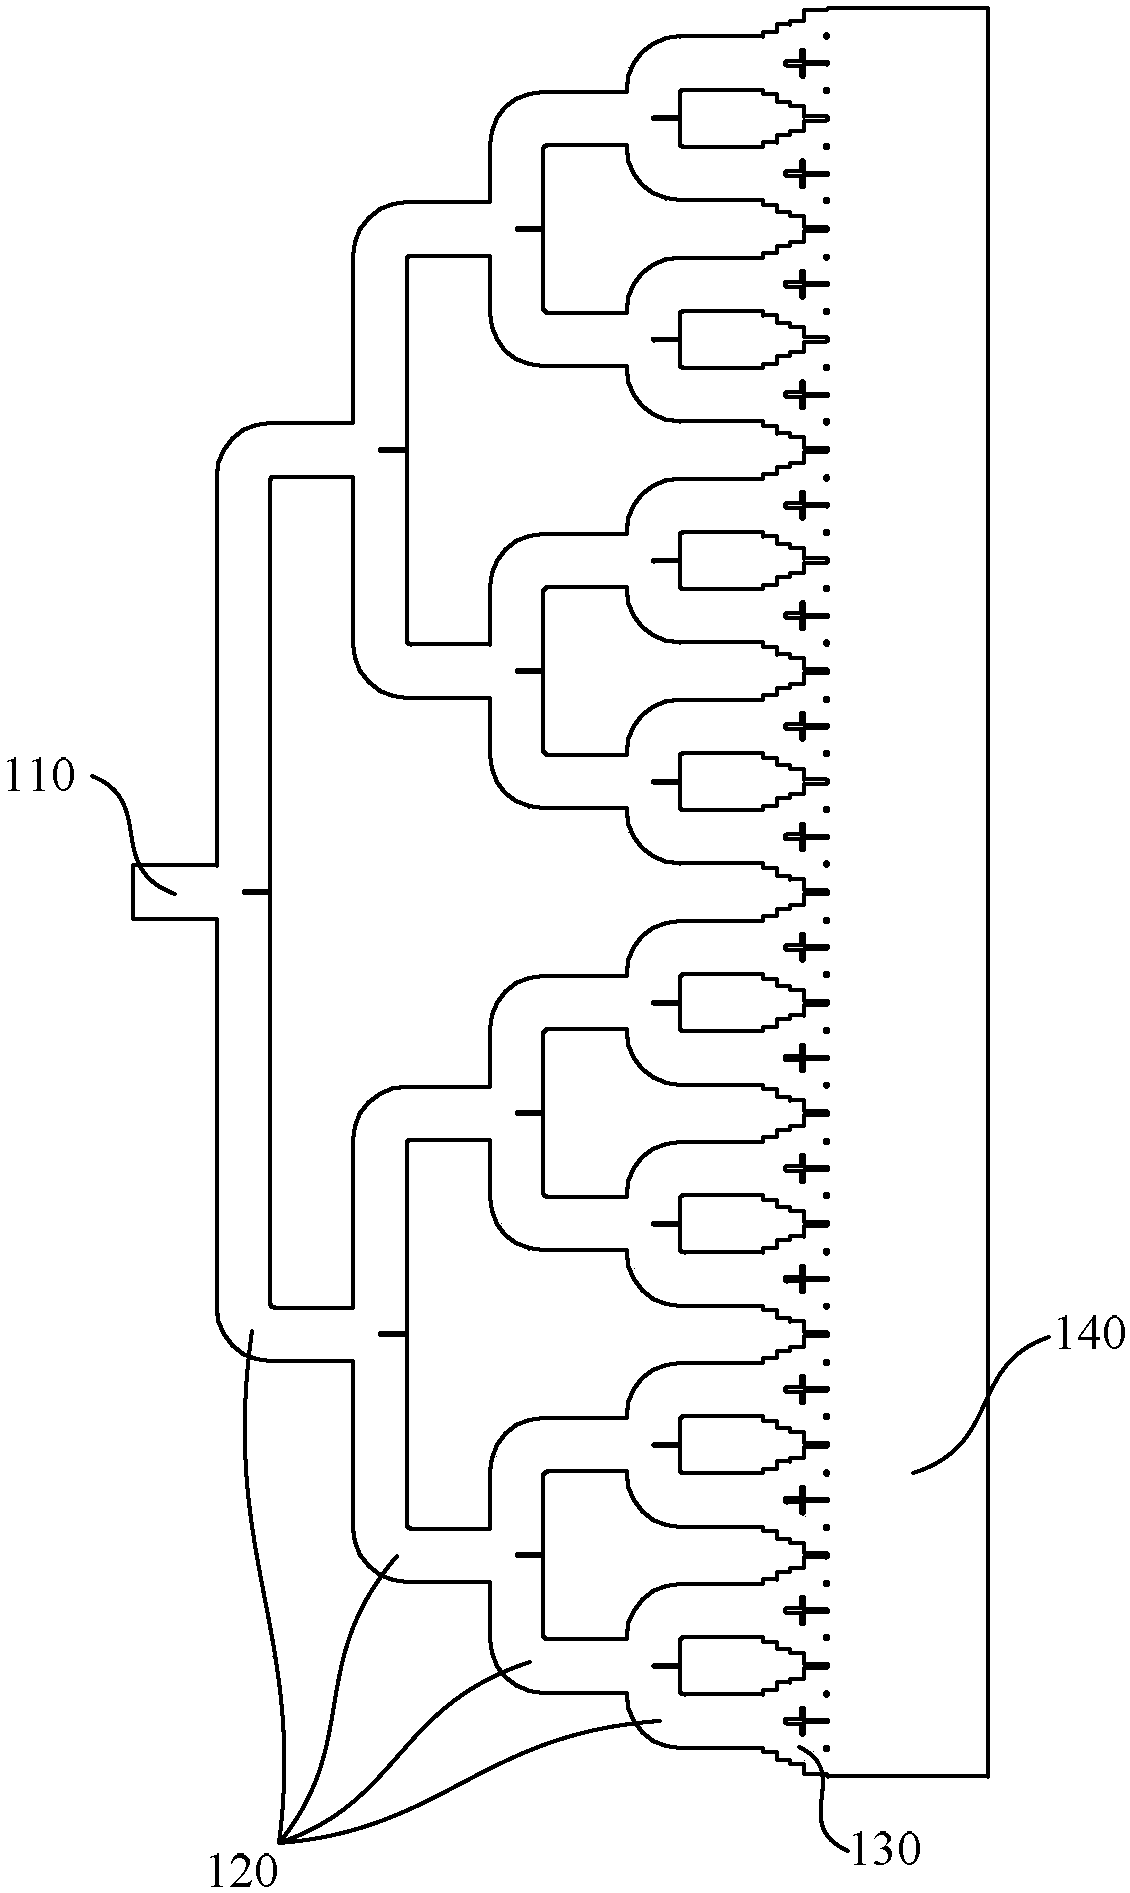 Feed structure for planar waveguide antenna